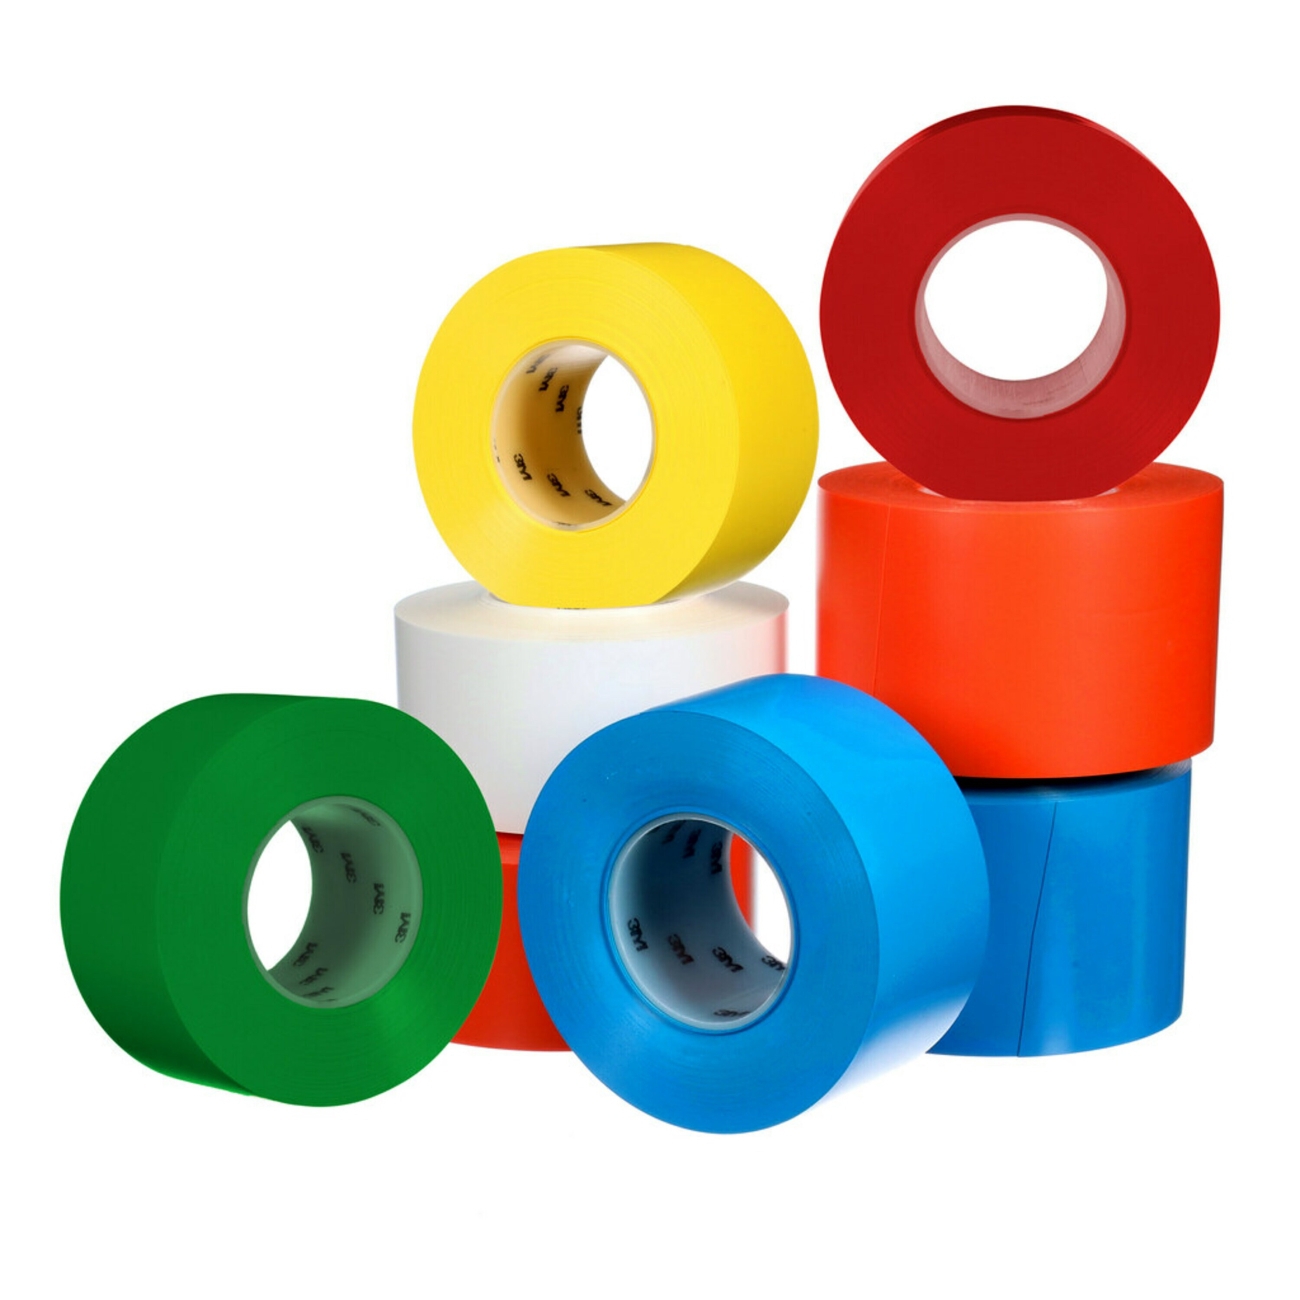 3M extra strong floor marking tape 971, green, 50.8mm x 32.9m, 0.81mm